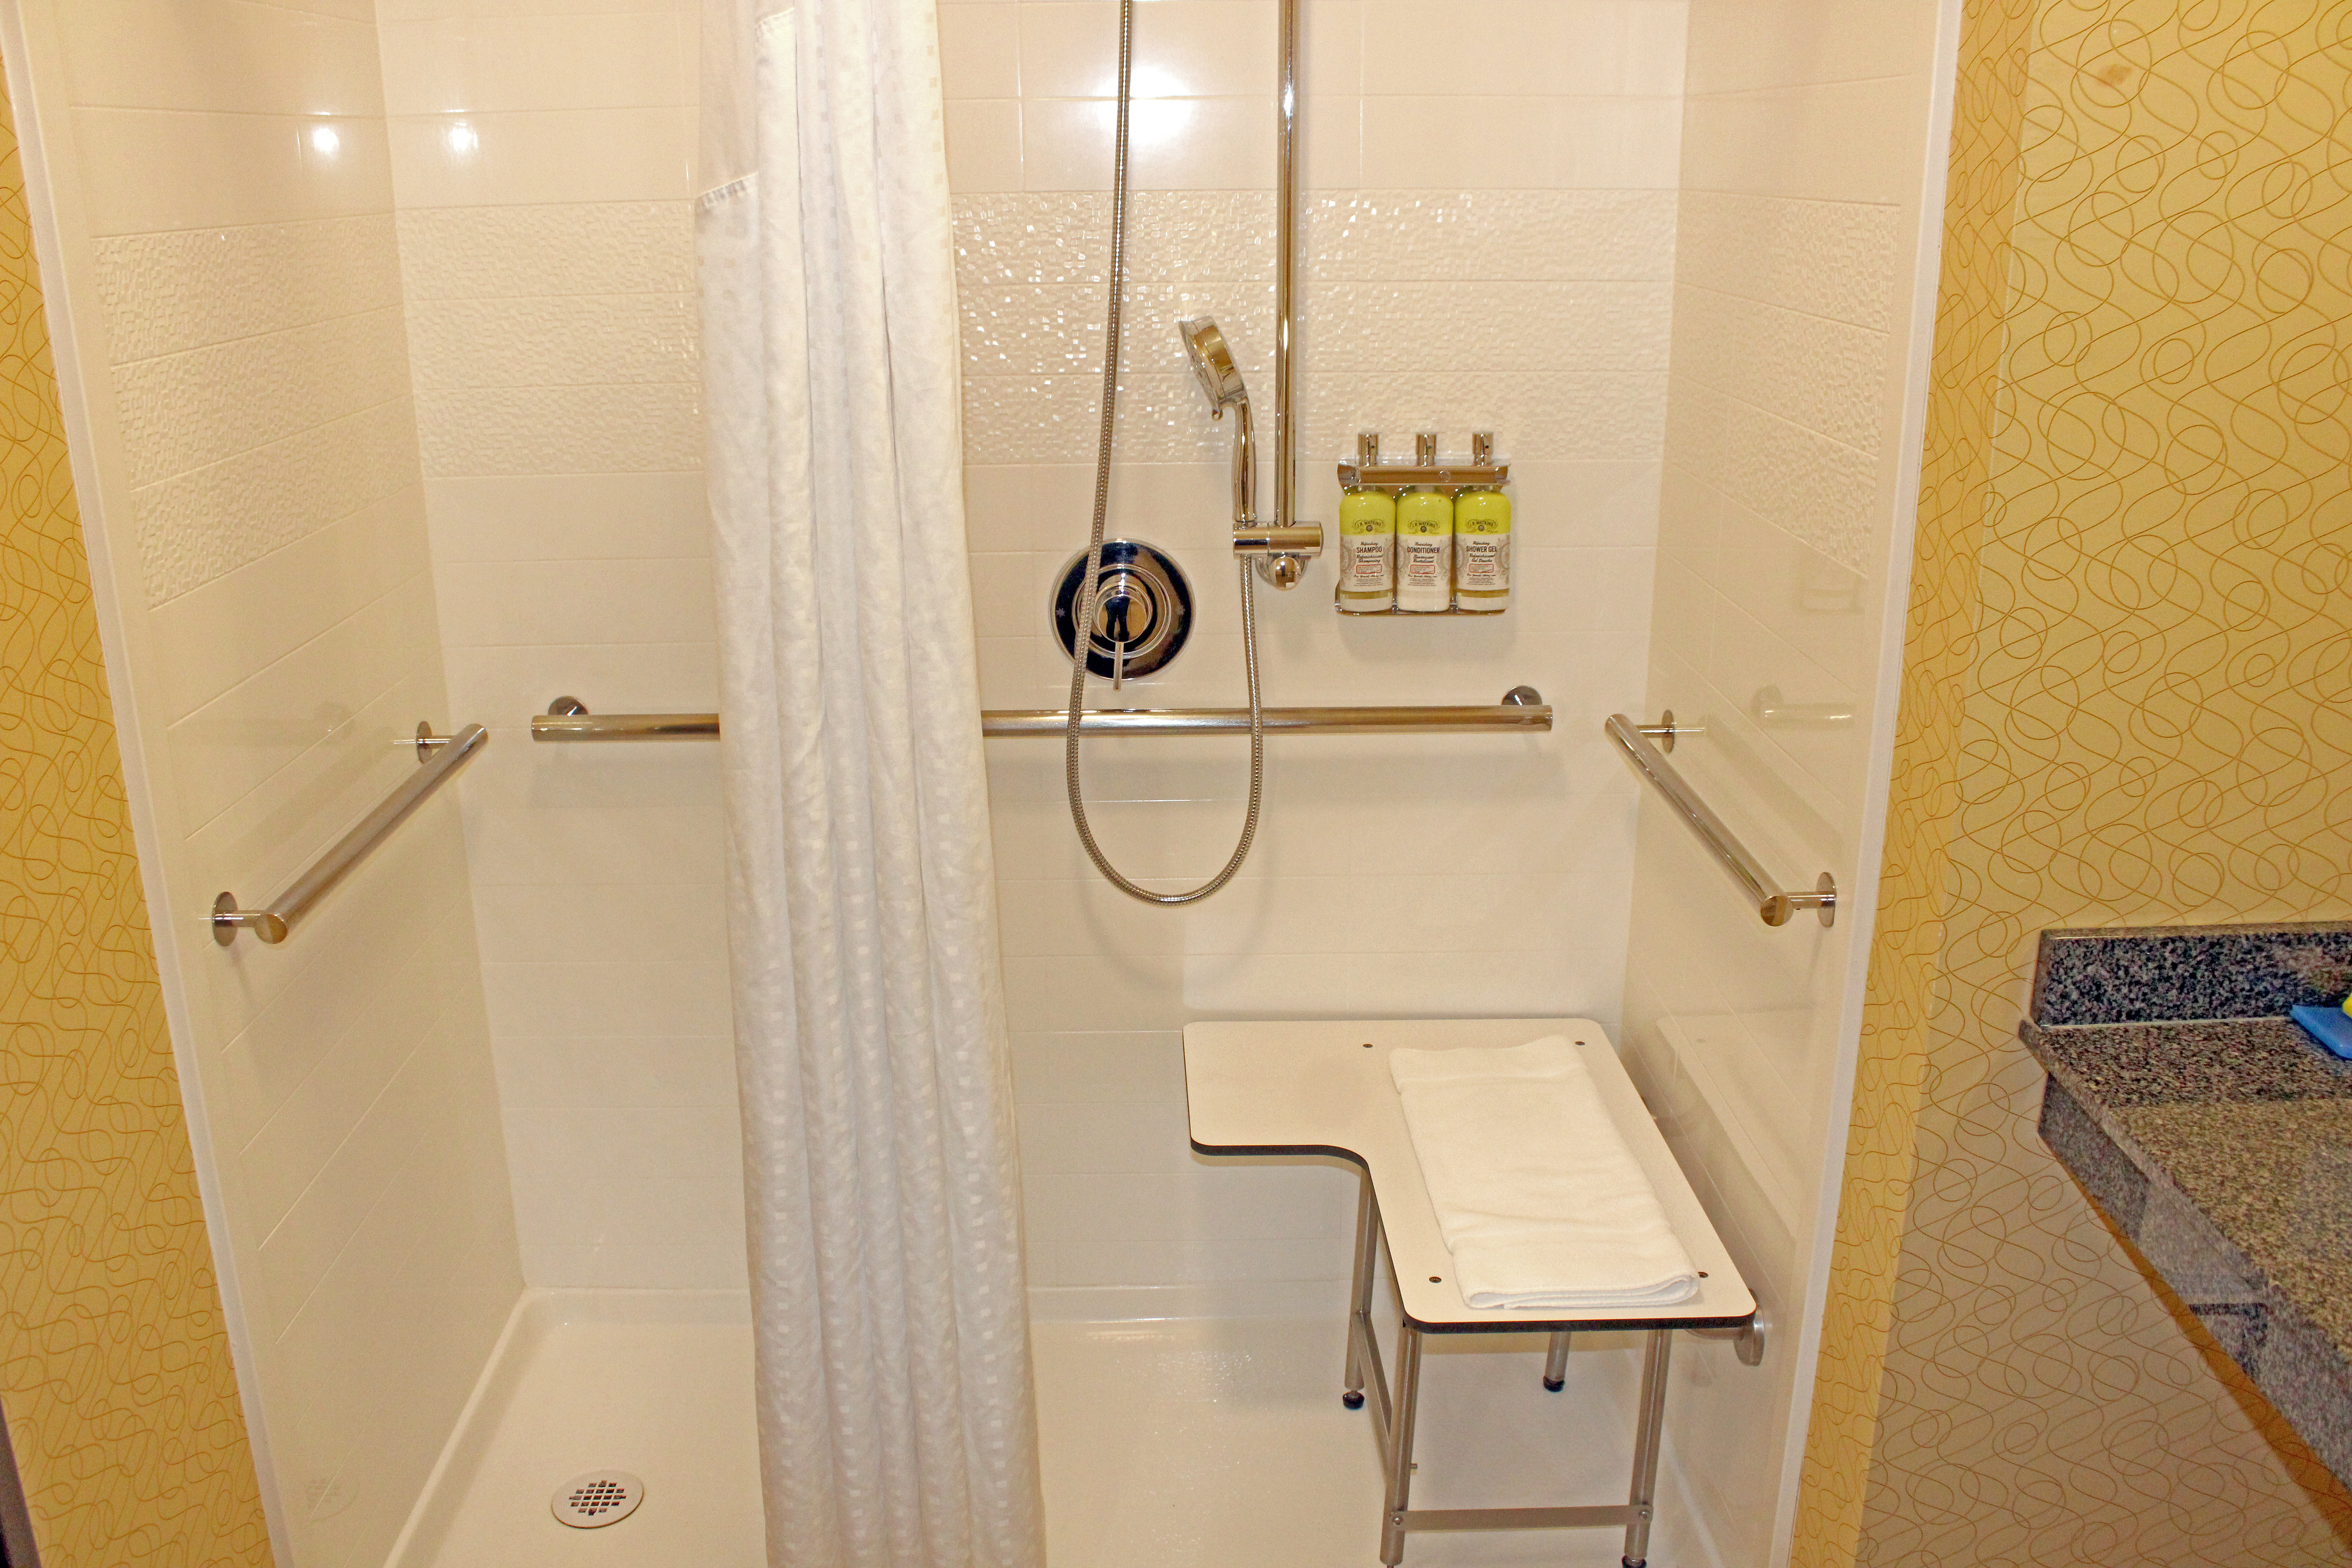 Roll-in shower with grab bars, seat and detachable shower wand.